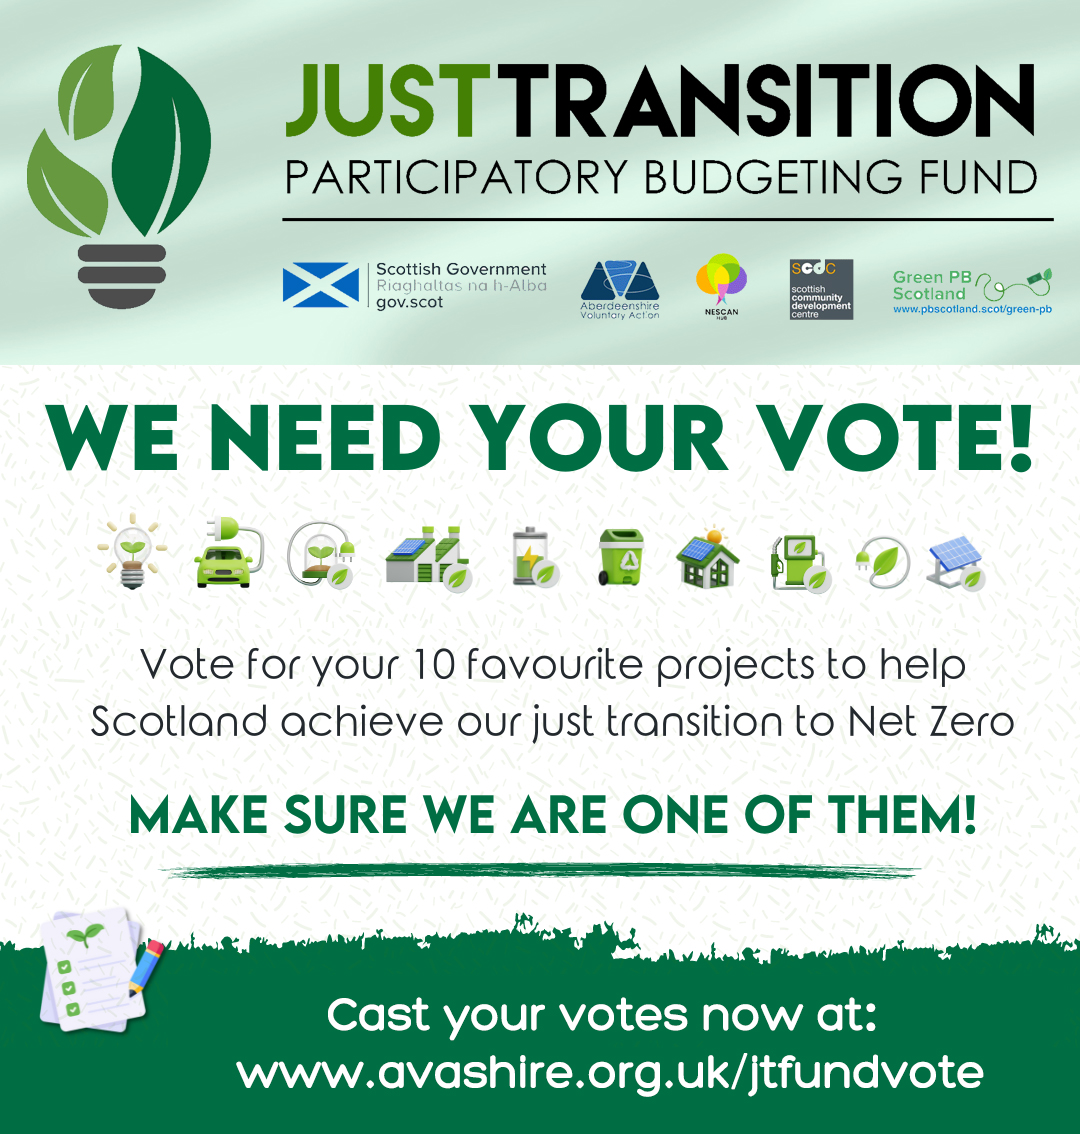 Skene Parish Church needs your vote! @scotgov have given £1M to support projects that are working on #NetZero (Just Transition Participatory Budgeting Fund). #Aberdeenshire Click here to vote now - avashire.org.uk/jtfundvote @NescanHub #JTPBFund